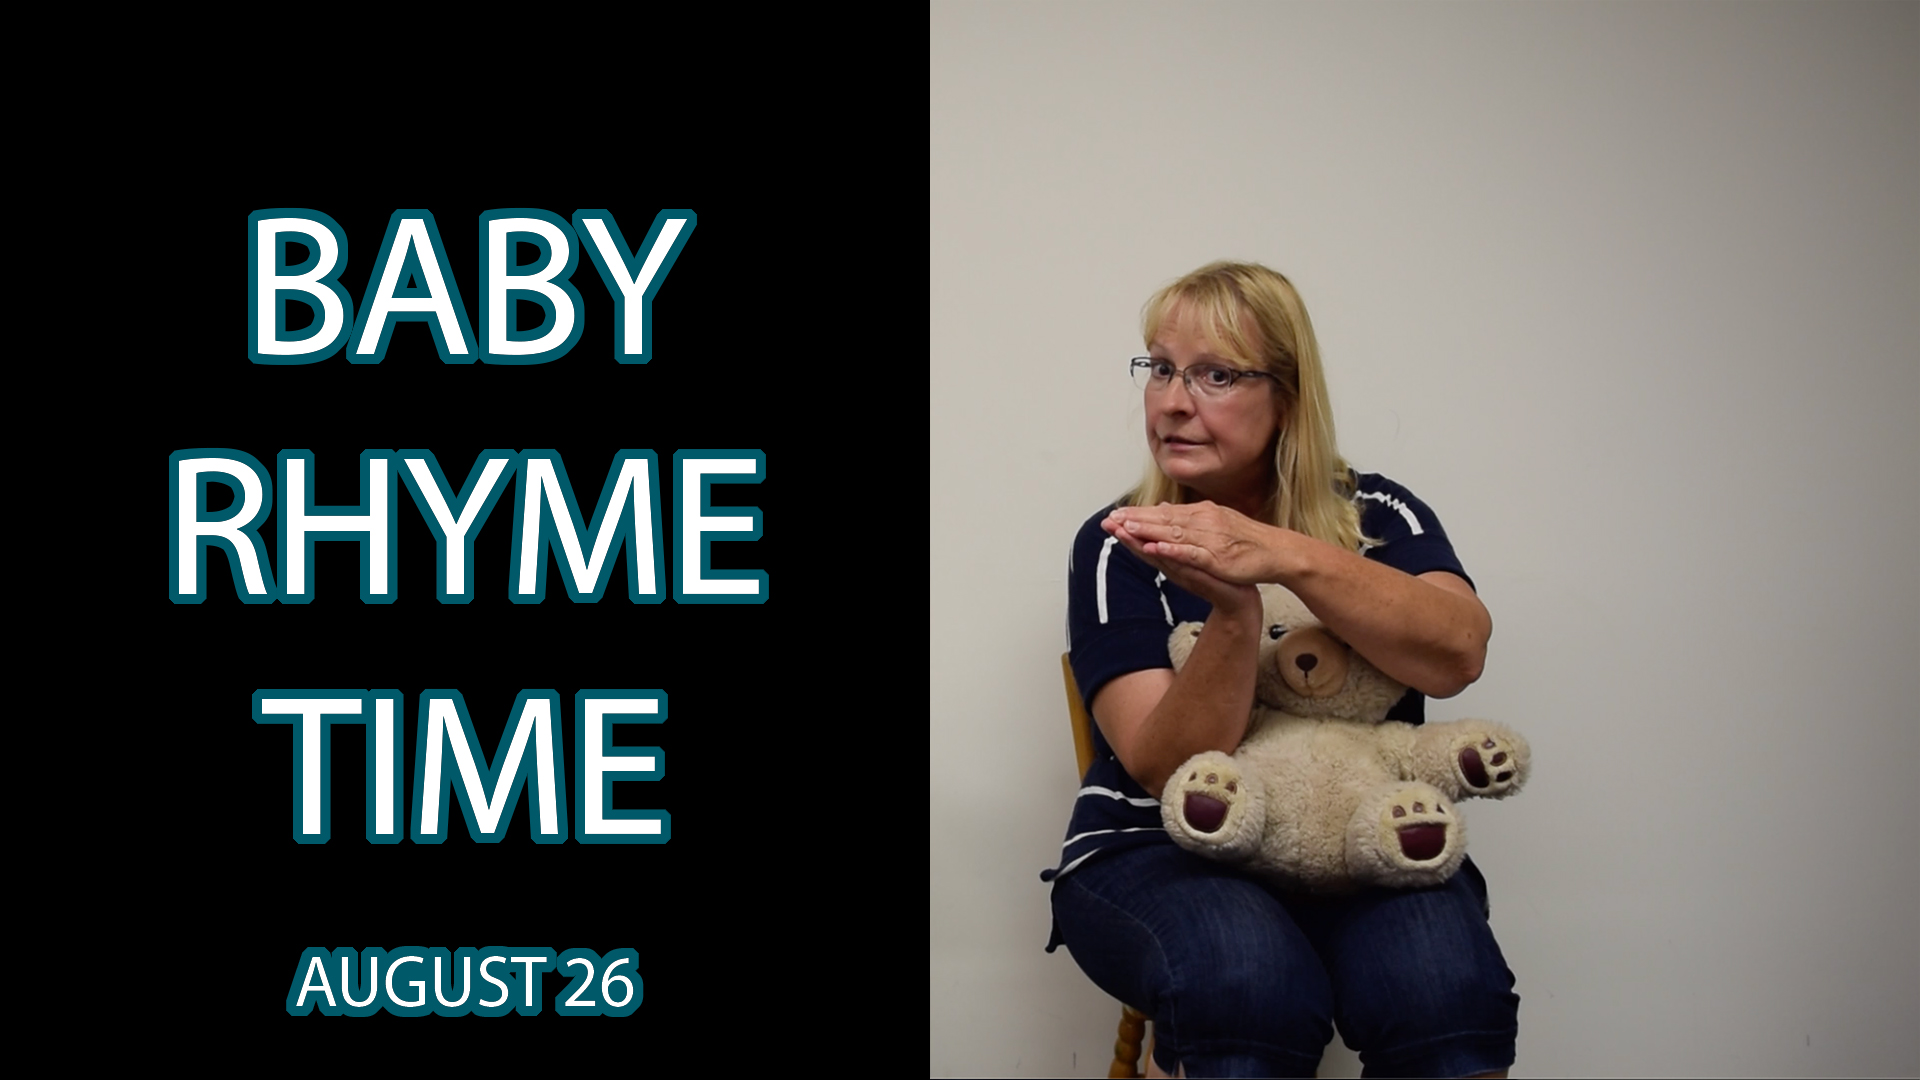 A woman holds a stuffed bear next to the text "Baby Rhyme Time August 26"